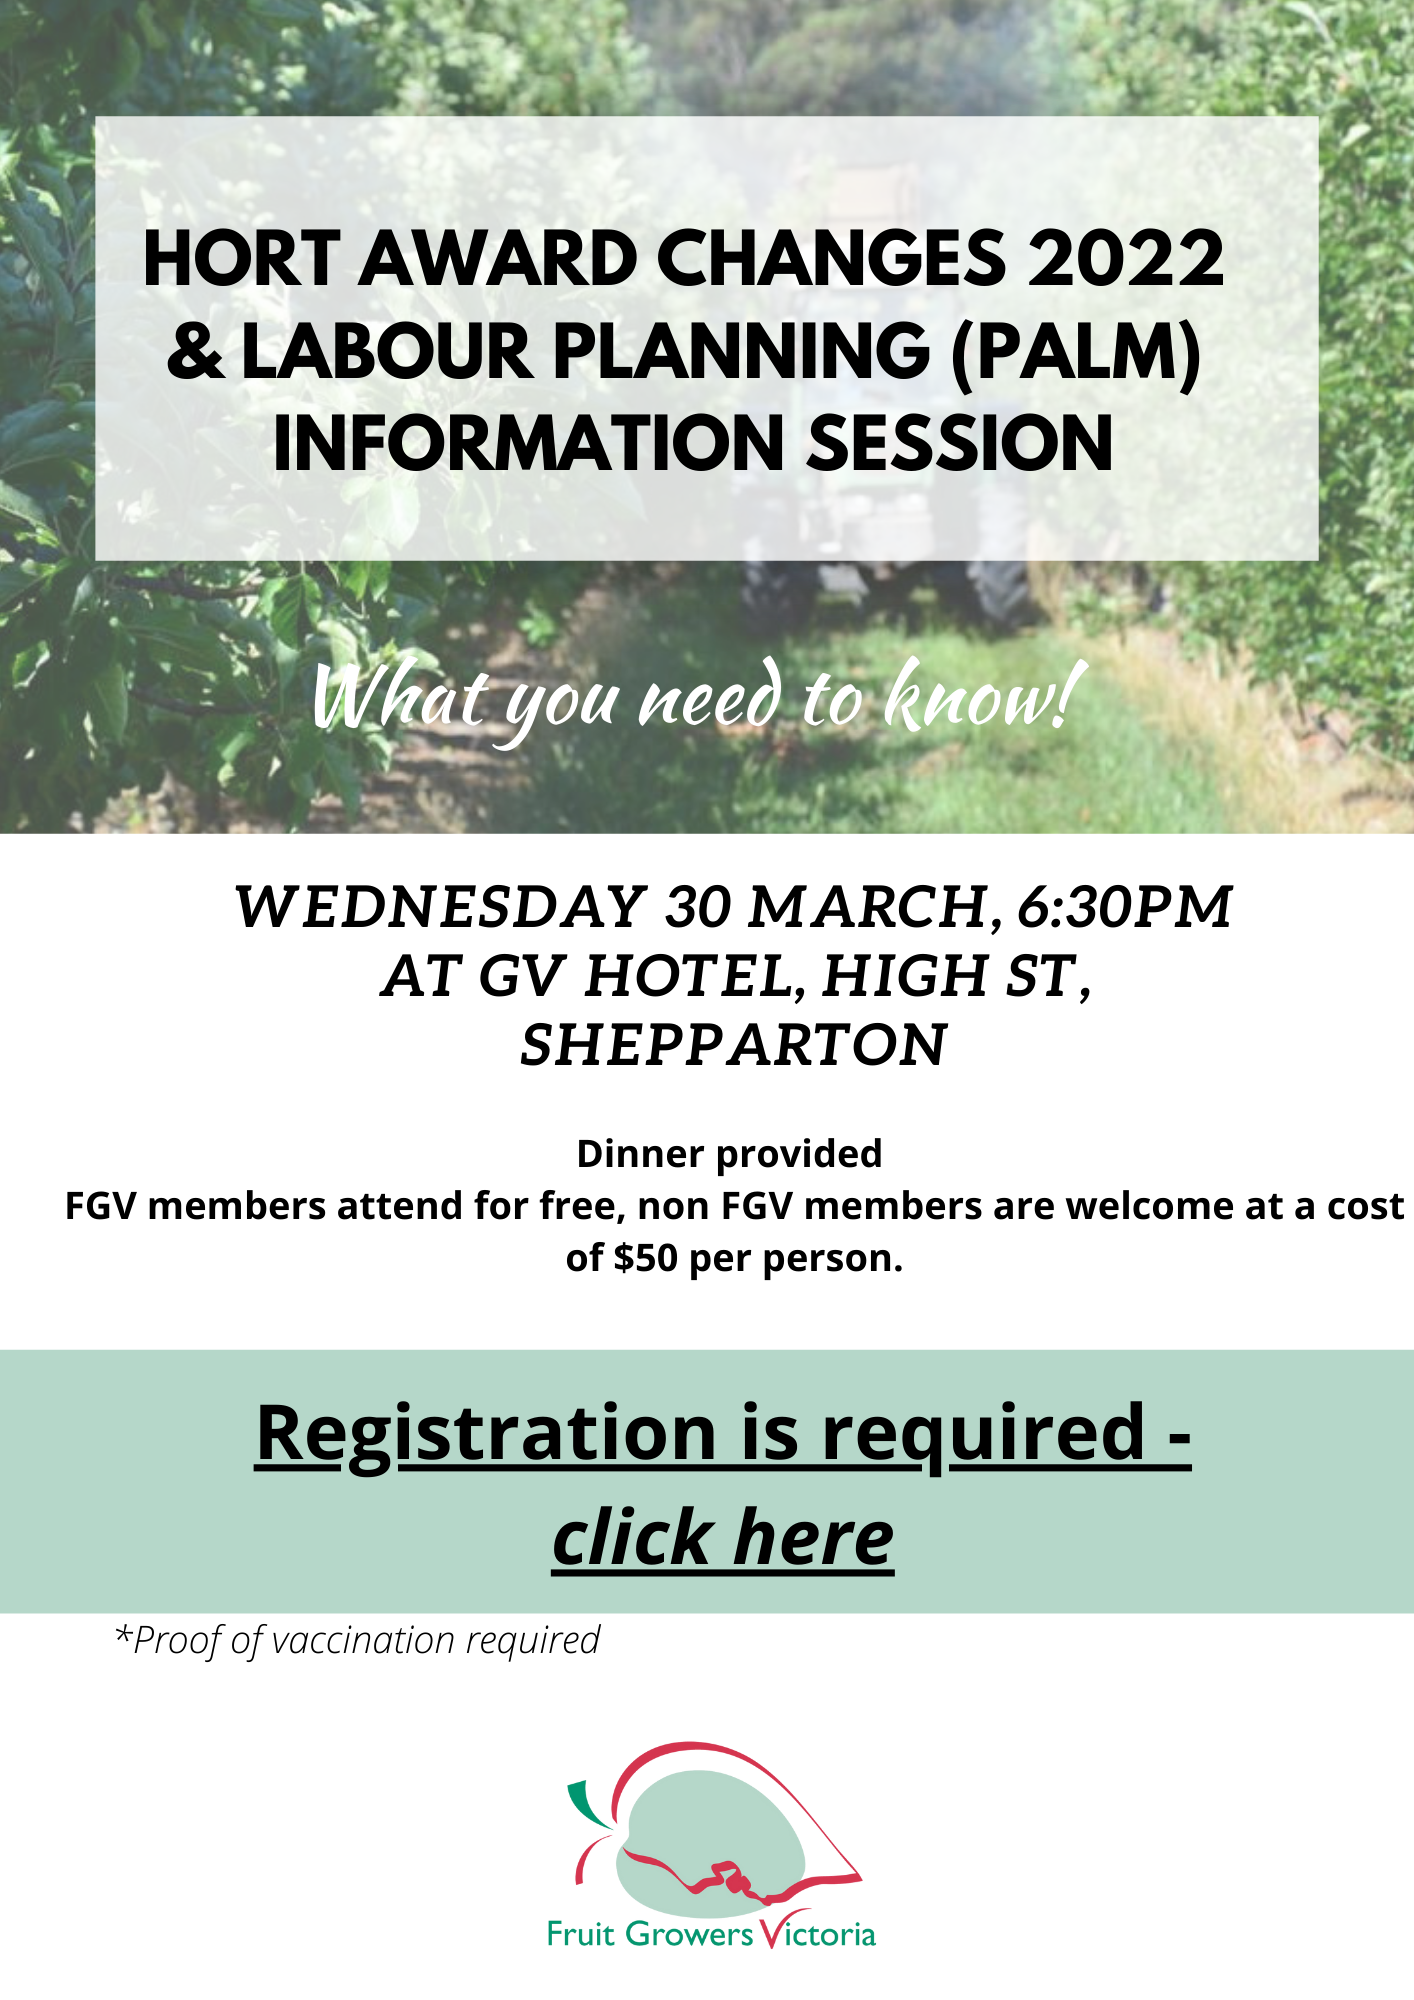 FGV Info Session - Hort Award Changes 2022 & Labour Planning (PALM)      Shepparton 30 March@6.30pm 